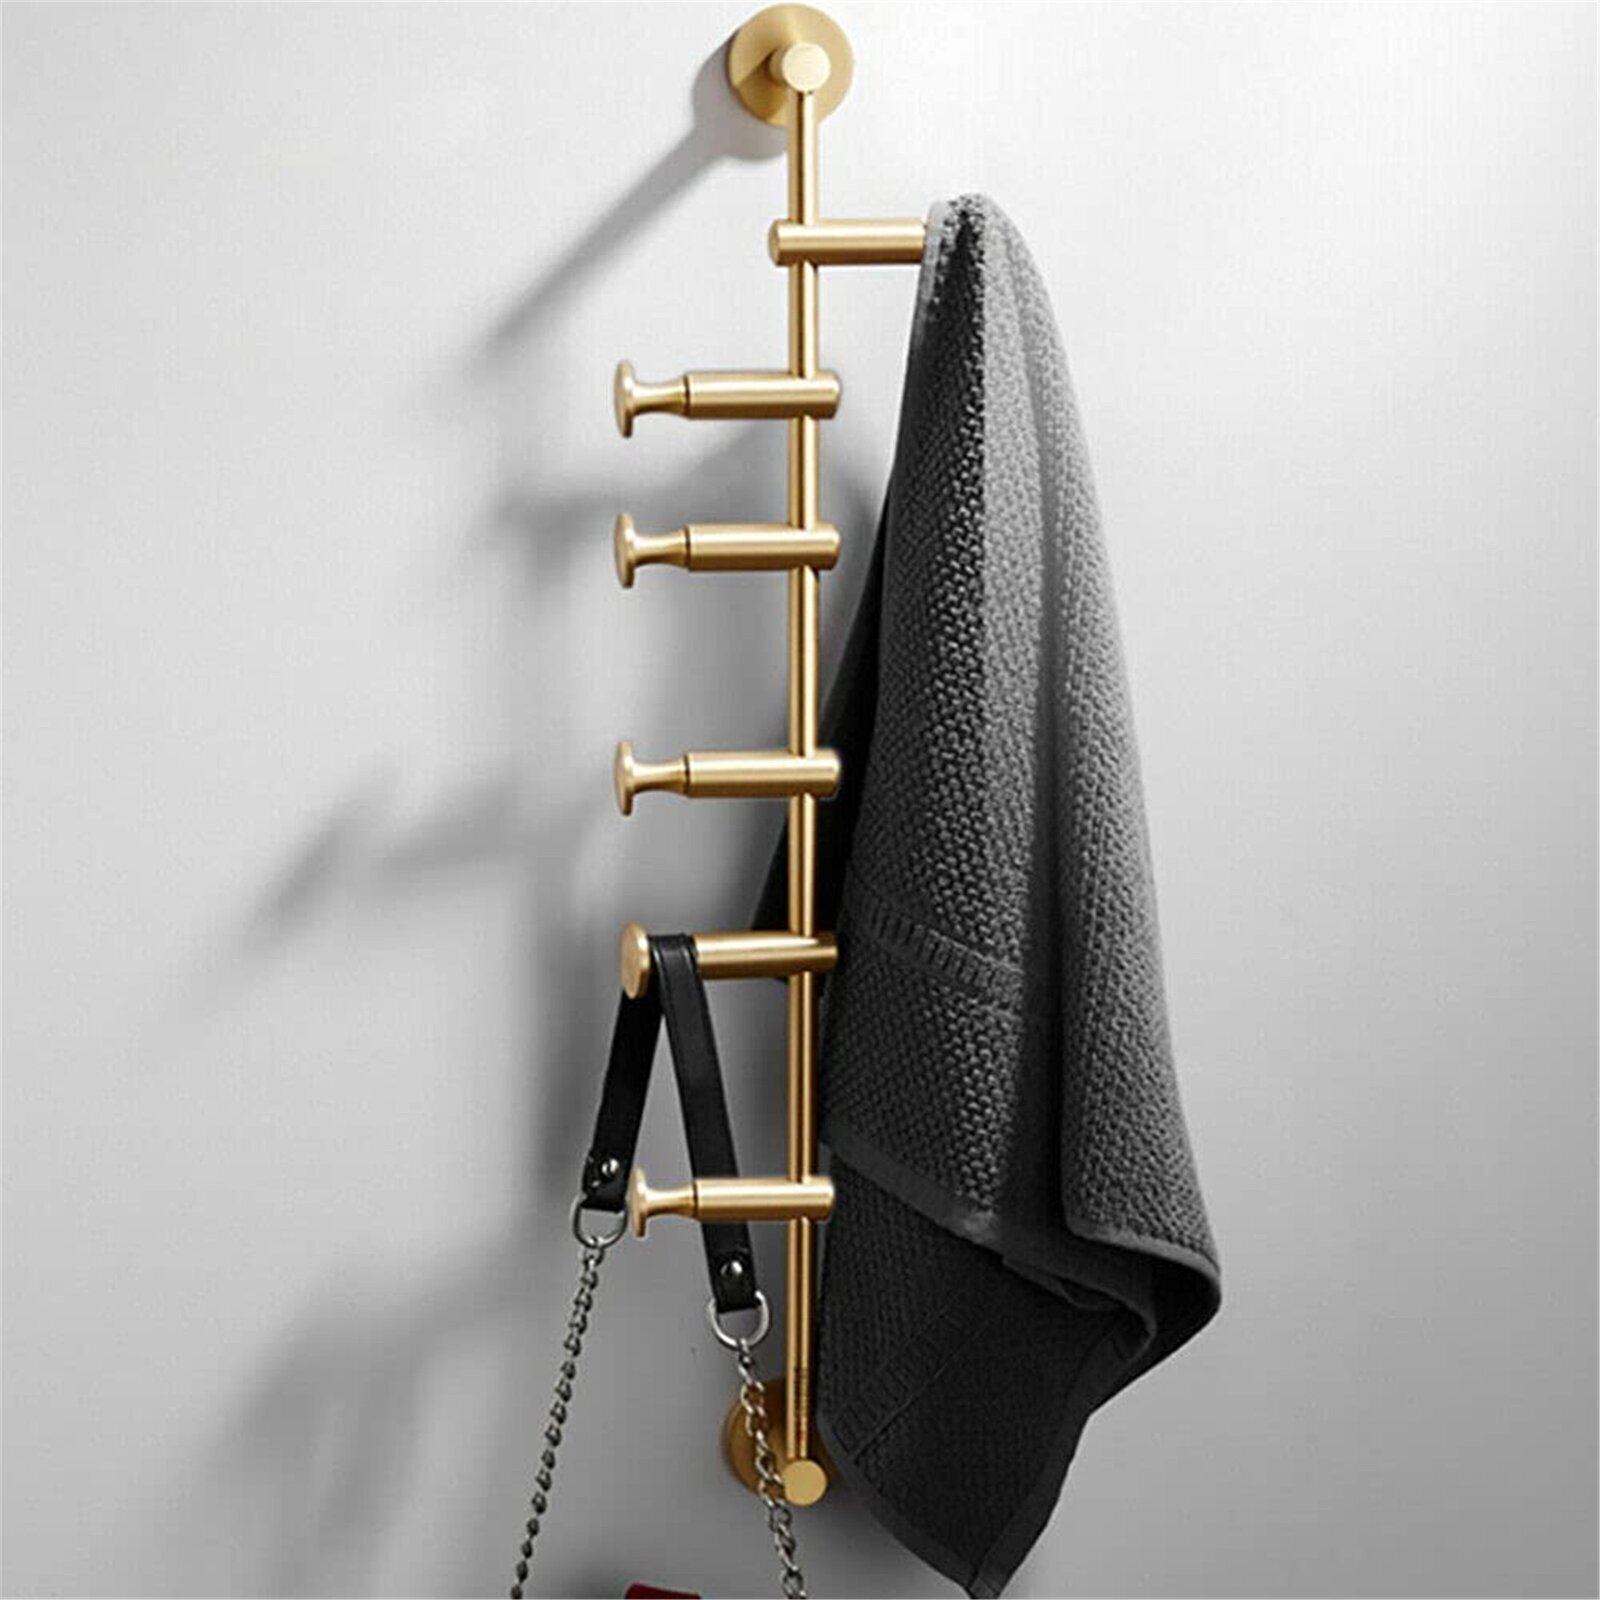 Simple Brass Coat Stand